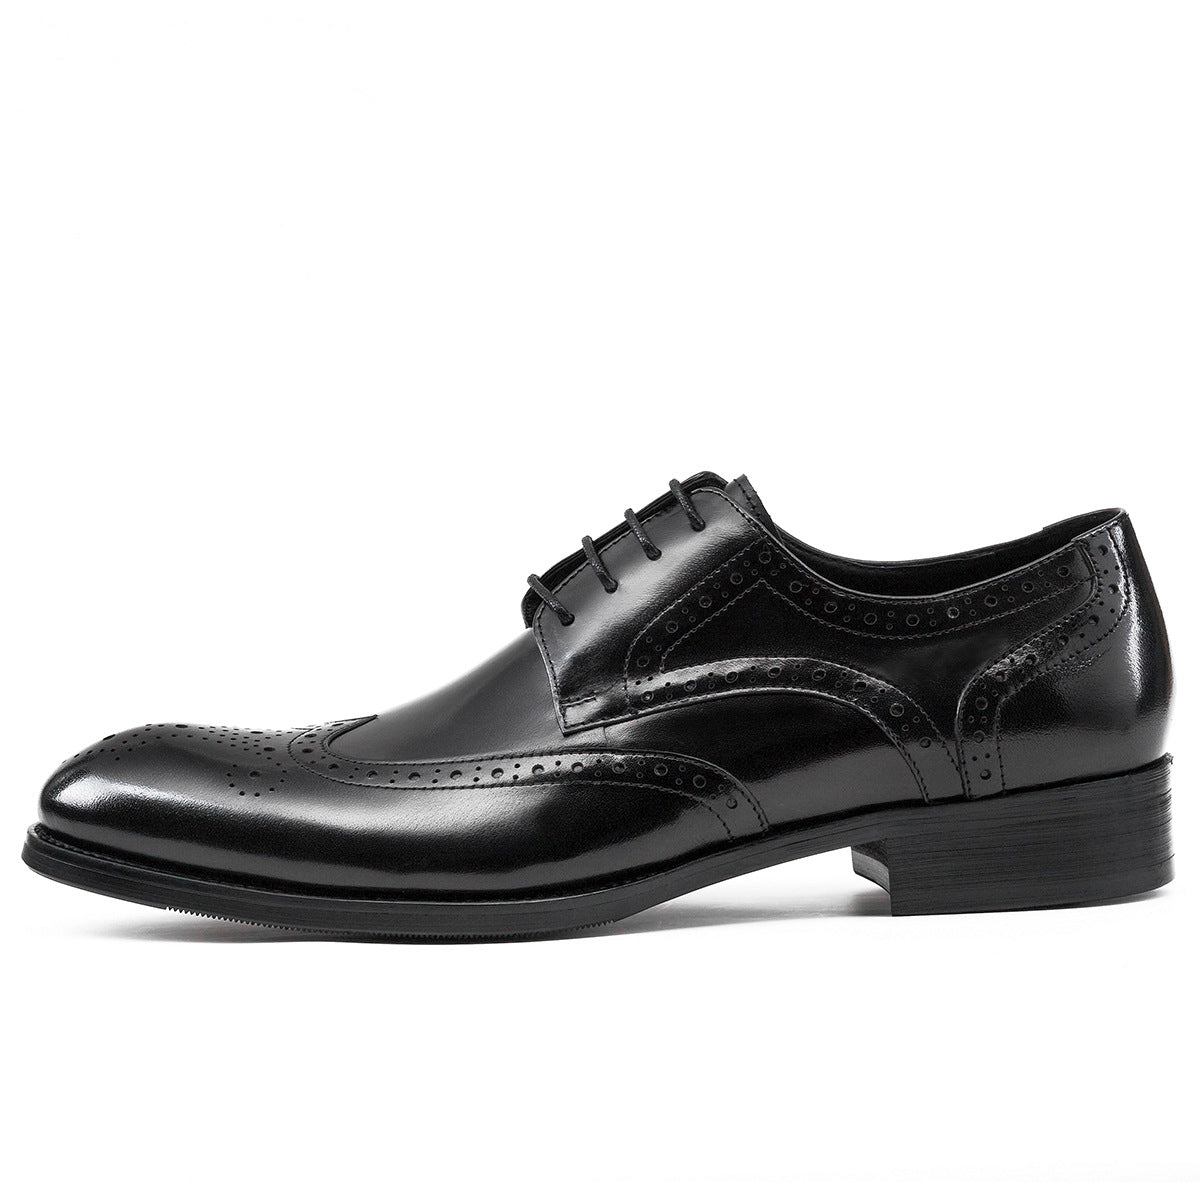 Men Classic Embossing Leather Oxford Shoes-RAIIFY